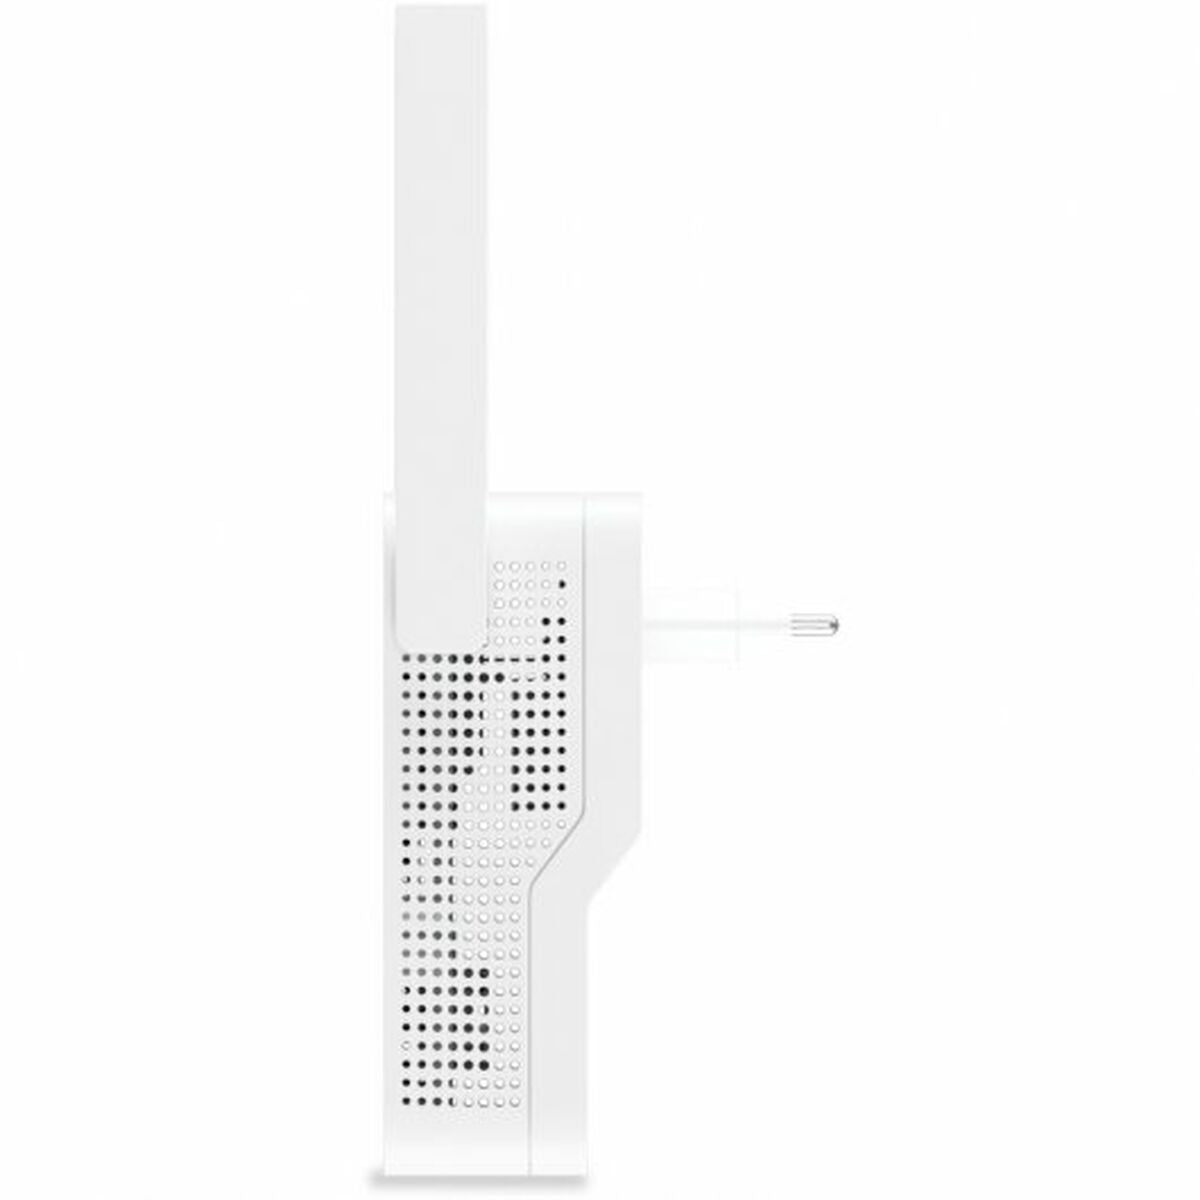 Access point STRONG White, STRONG, Computing, Network devices, access-point-strong-white, Brand_STRONG, category-reference-2609, category-reference-2803, category-reference-2820, category-reference-t-19685, category-reference-t-19914, category-reference-t-21369, Condition_NEW, networks/wiring, Price_50 - 100, Teleworking, RiotNook